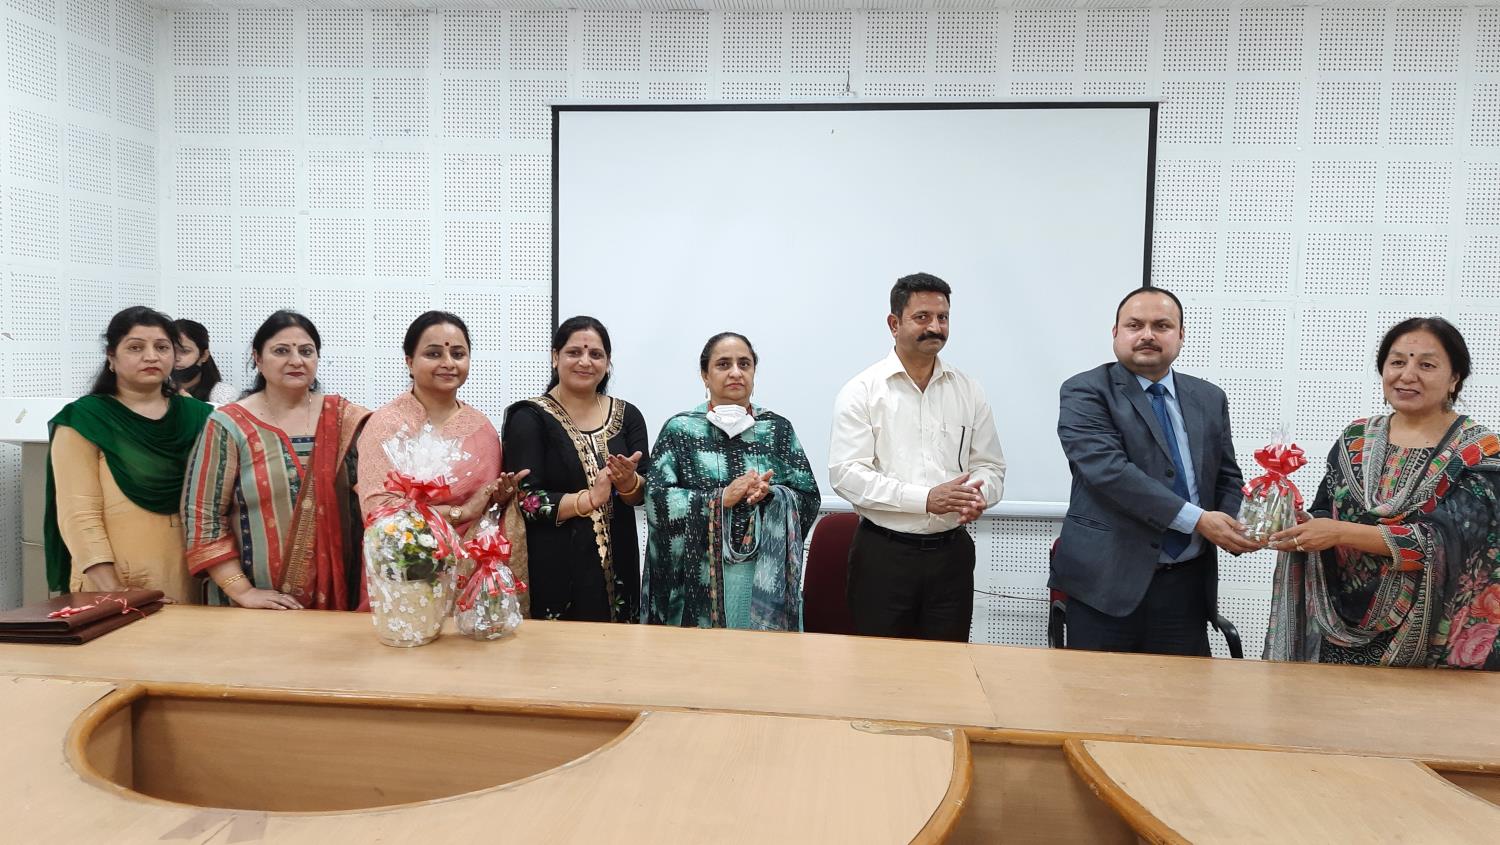  MoU Signed between Dogra College of Education and Govt. College of Education Jammu (J&K)